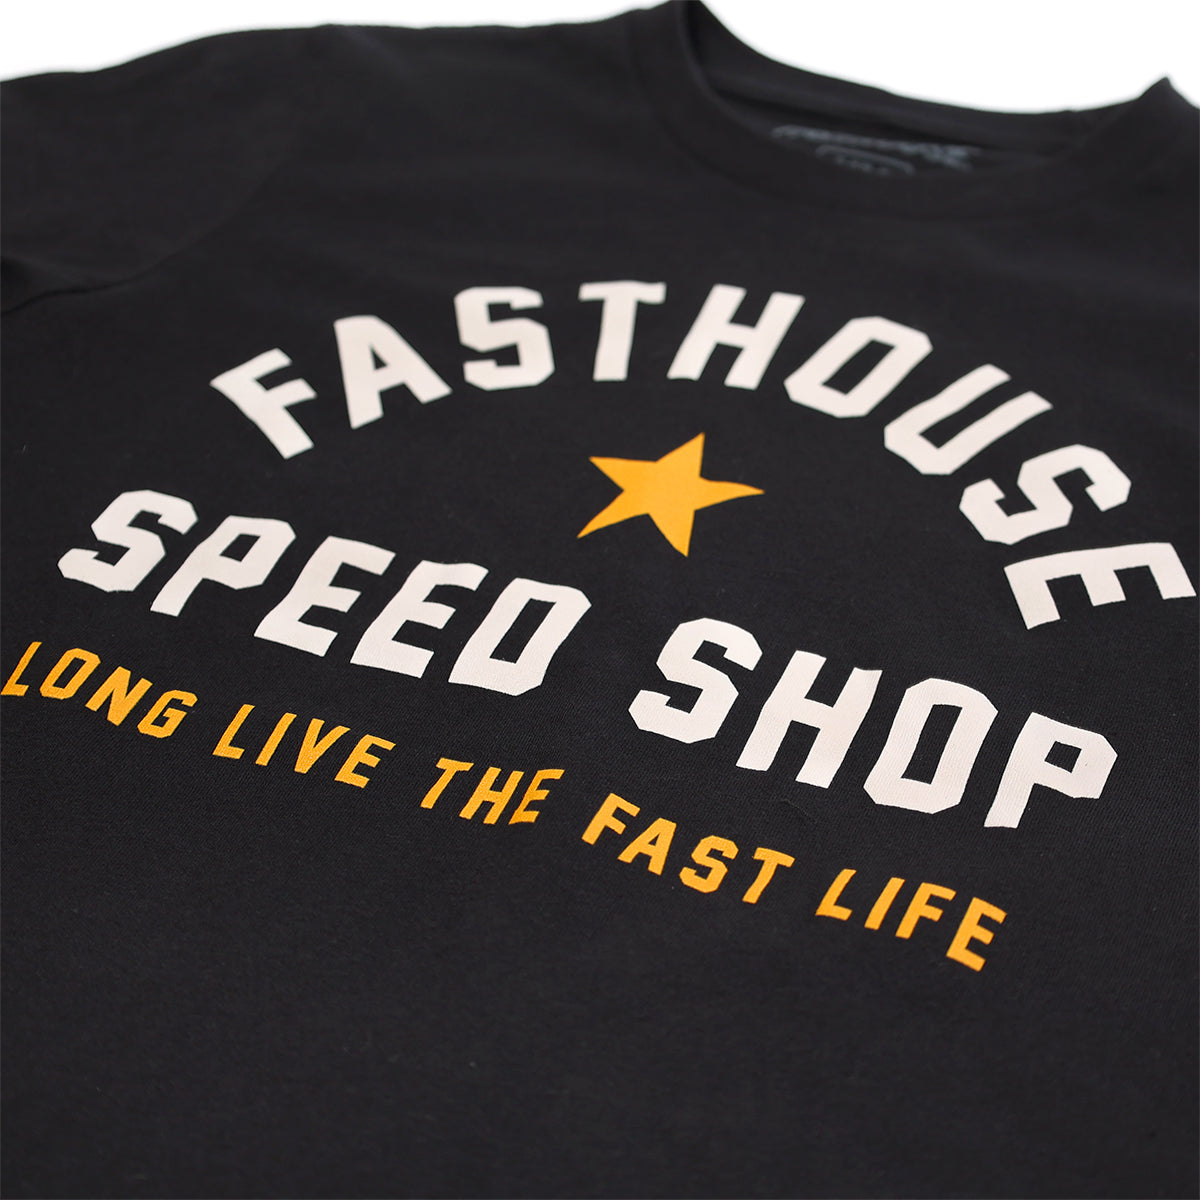 Fast Life Youth Tee - Black